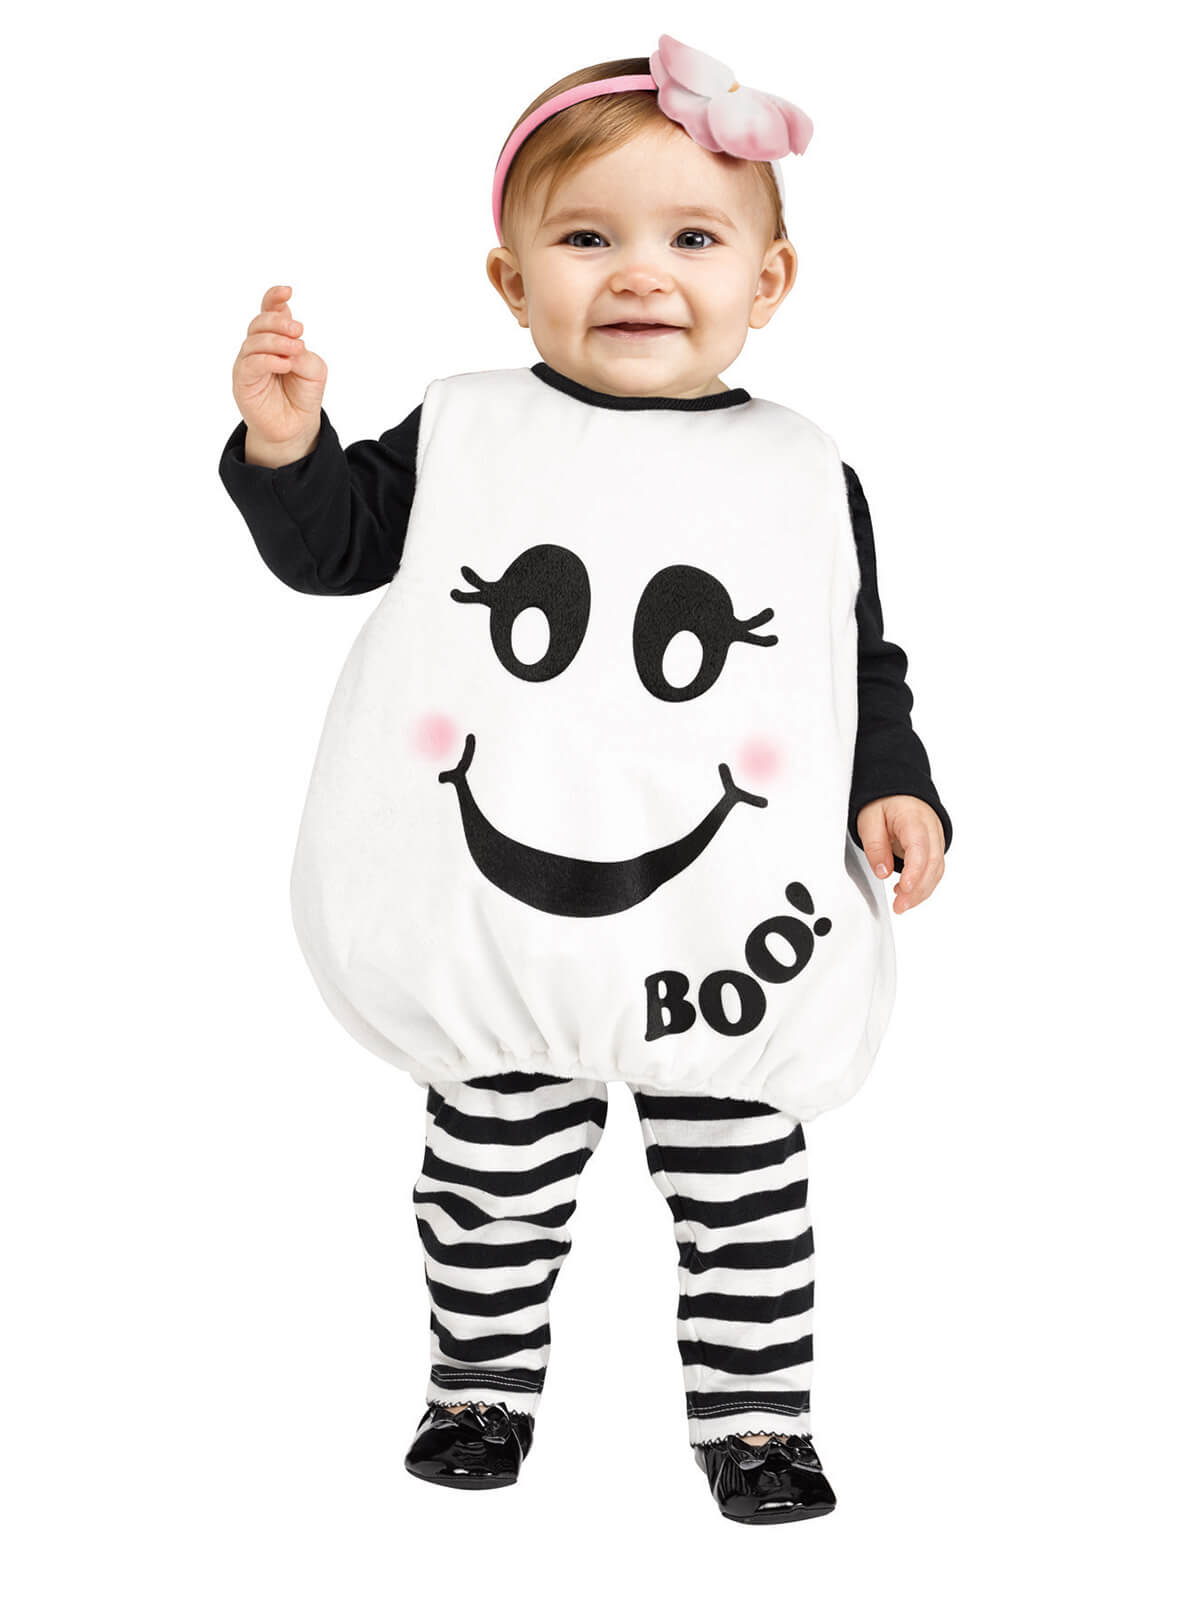 ghost halloween costume for baby